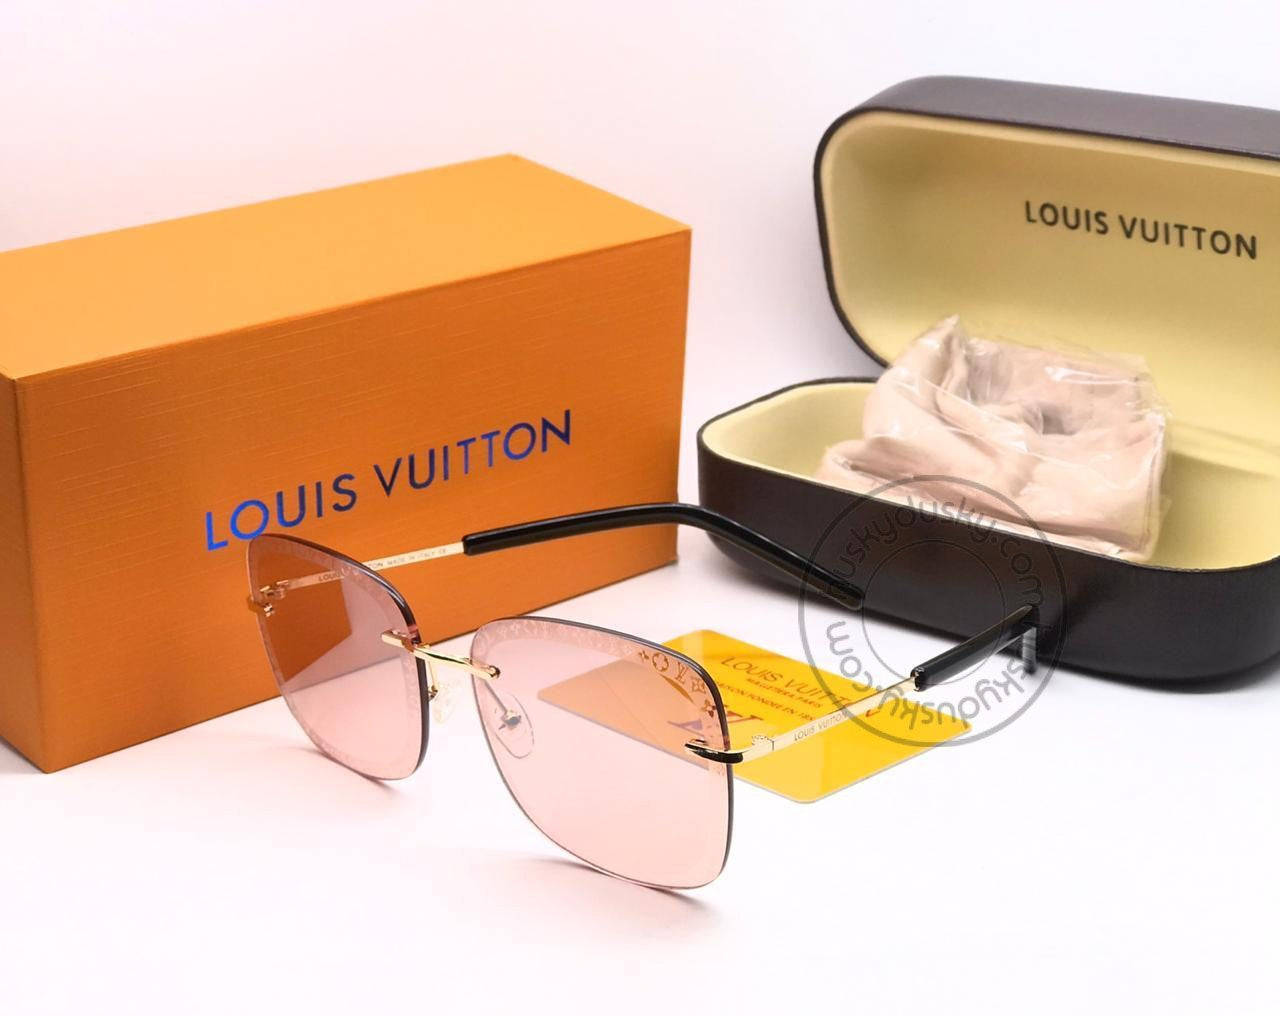 Louis Vuitton Branded Pink Glass Men's and Women's Sunglass for Man and Woman or Girls LV-140 Gold And Black Frame Unisex Gift Sunglass